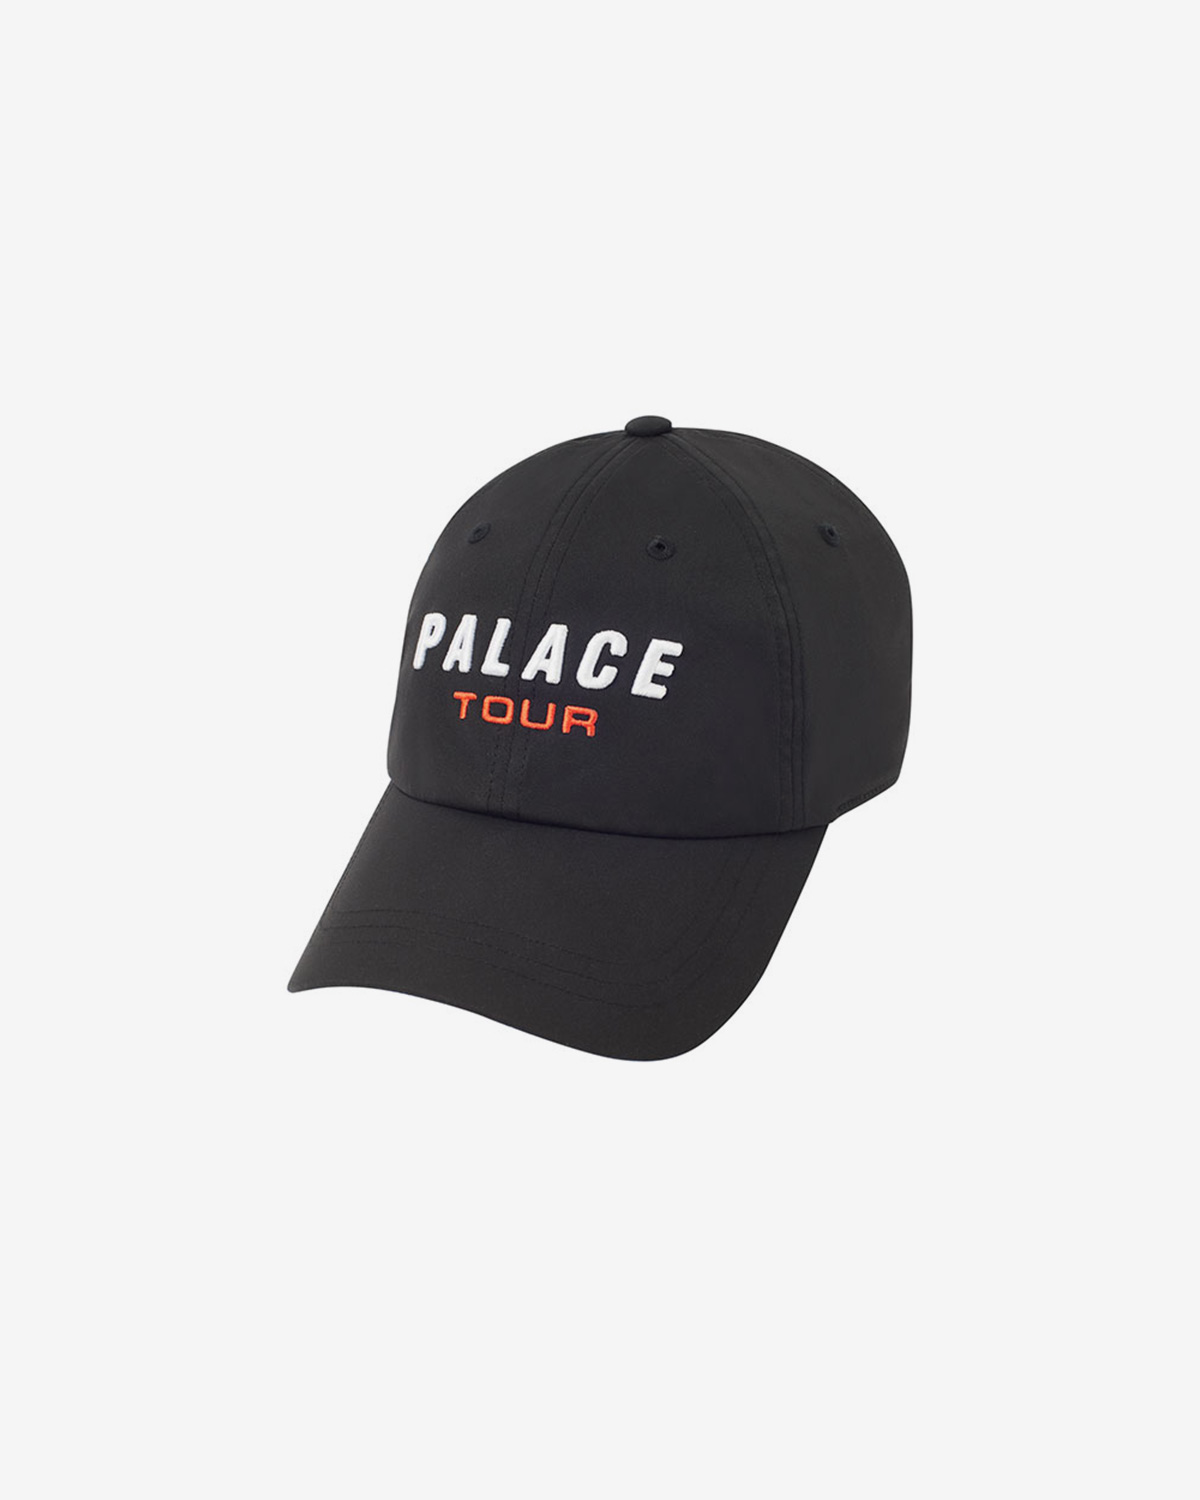 palace-adidas-golf-collaboration-official-look-11